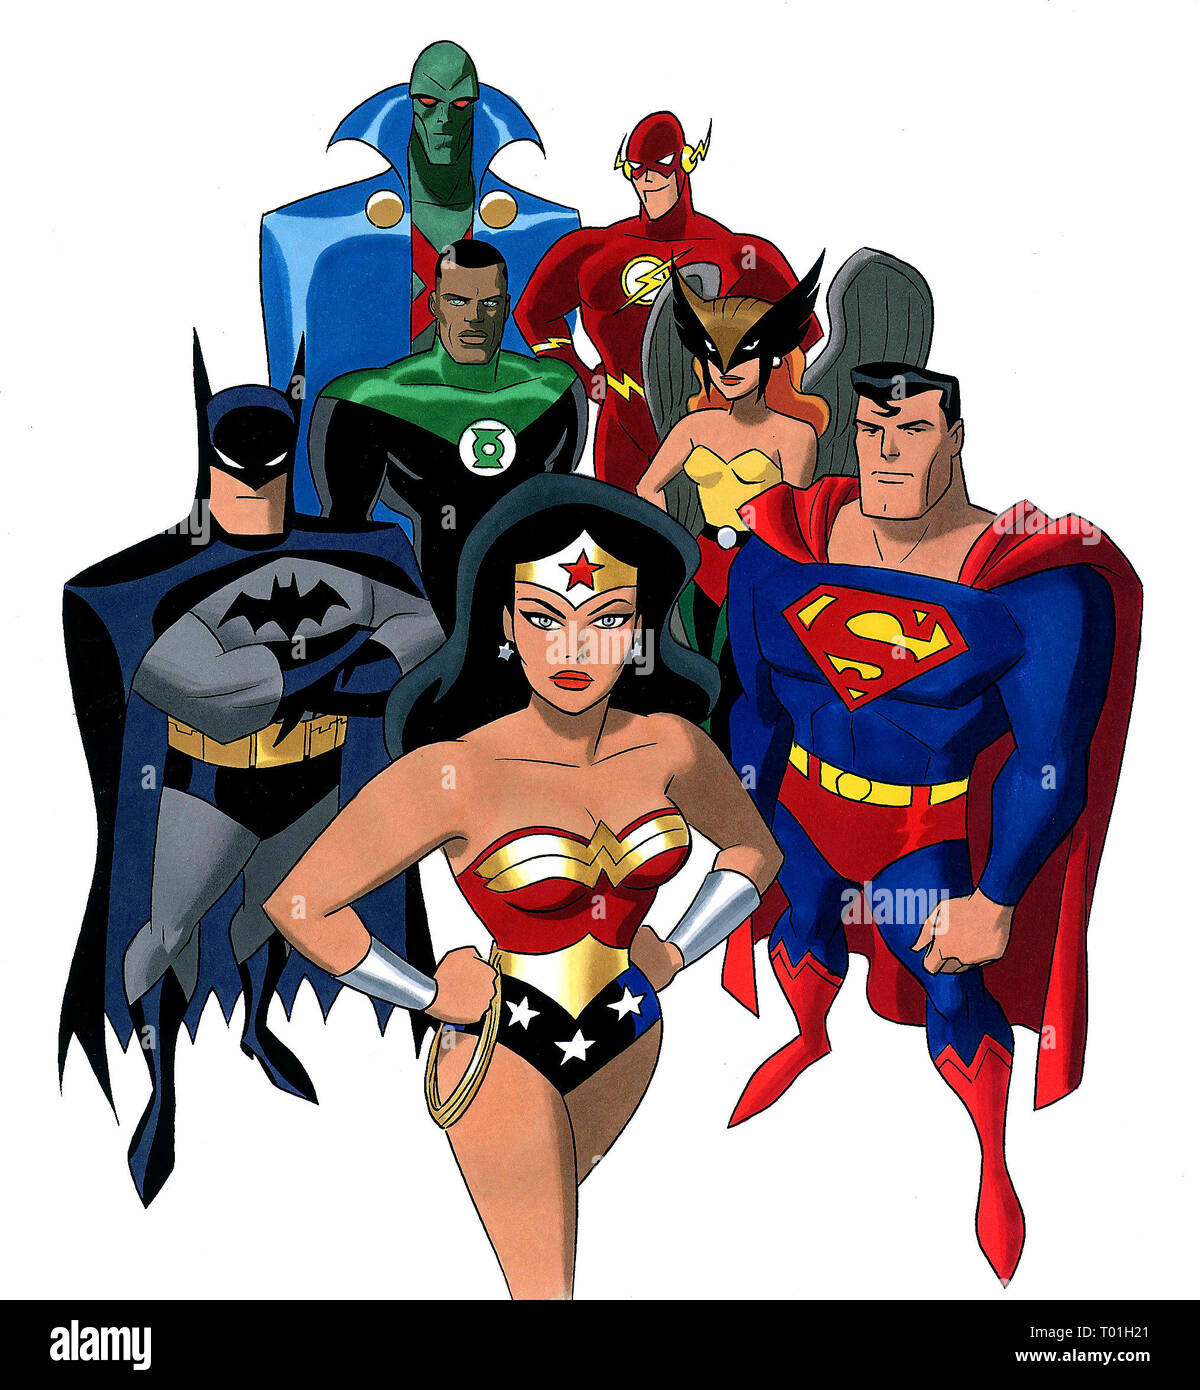 Justice league characters